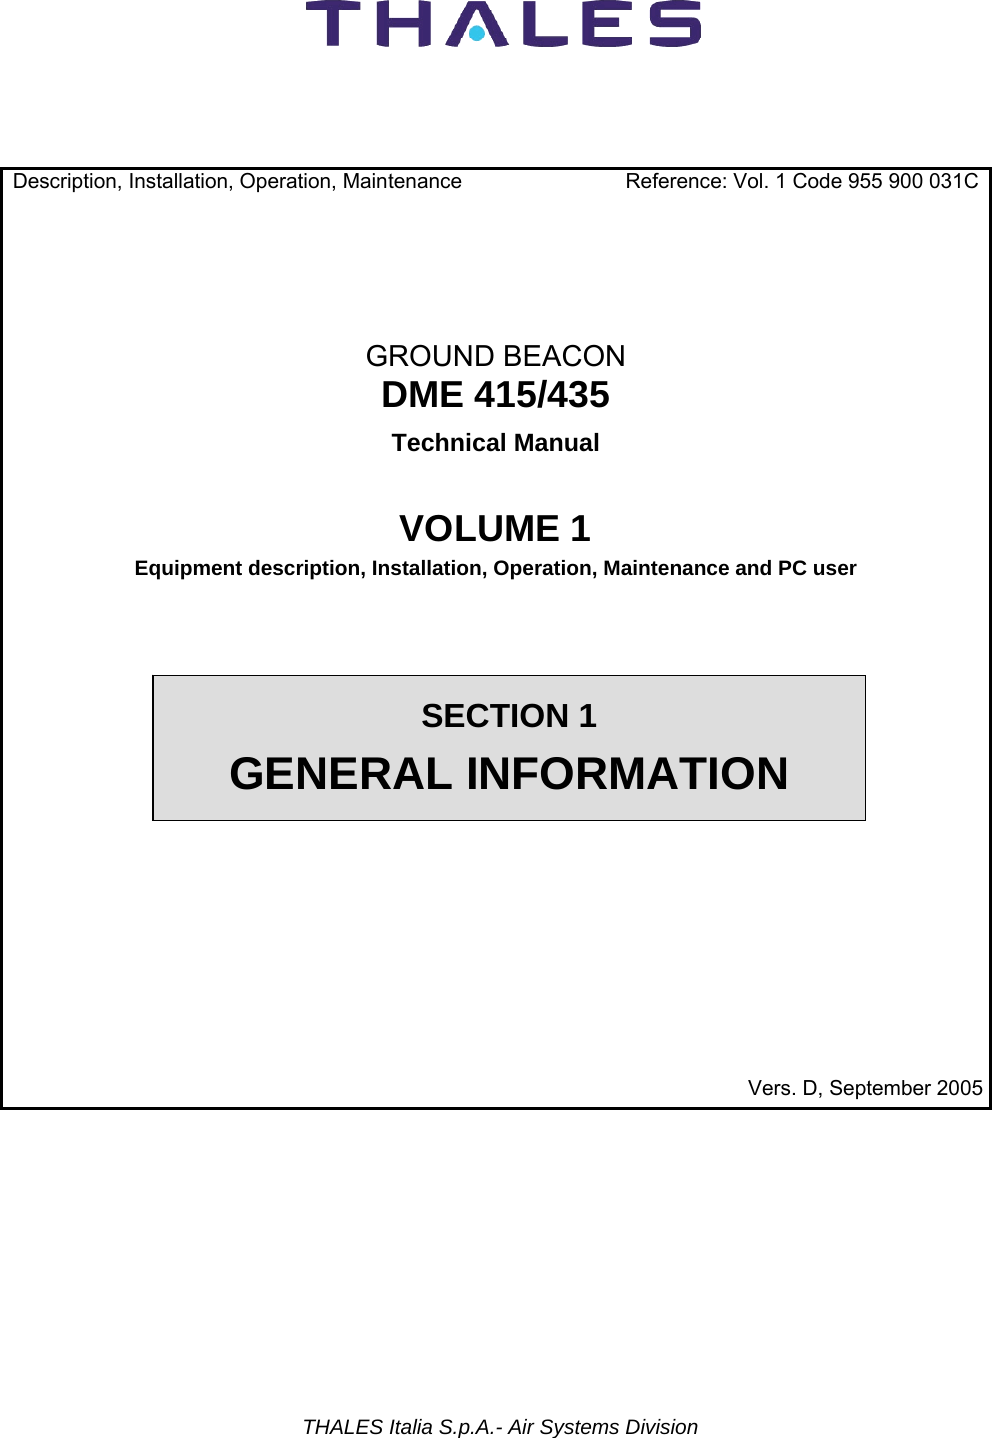           THALES Italia S.p.A.- Air Systems Division        Description, Installation, Operation, Maintenance  Reference: Vol. 1 Code 955 900 031C    GROUND BEACON DME 415/435 Technical Manual  VOLUME 1 Equipment description, Installation, Operation, Maintenance and PC user  Vers. D, September 2005 SECTION 1 GENERAL INFORMATION 